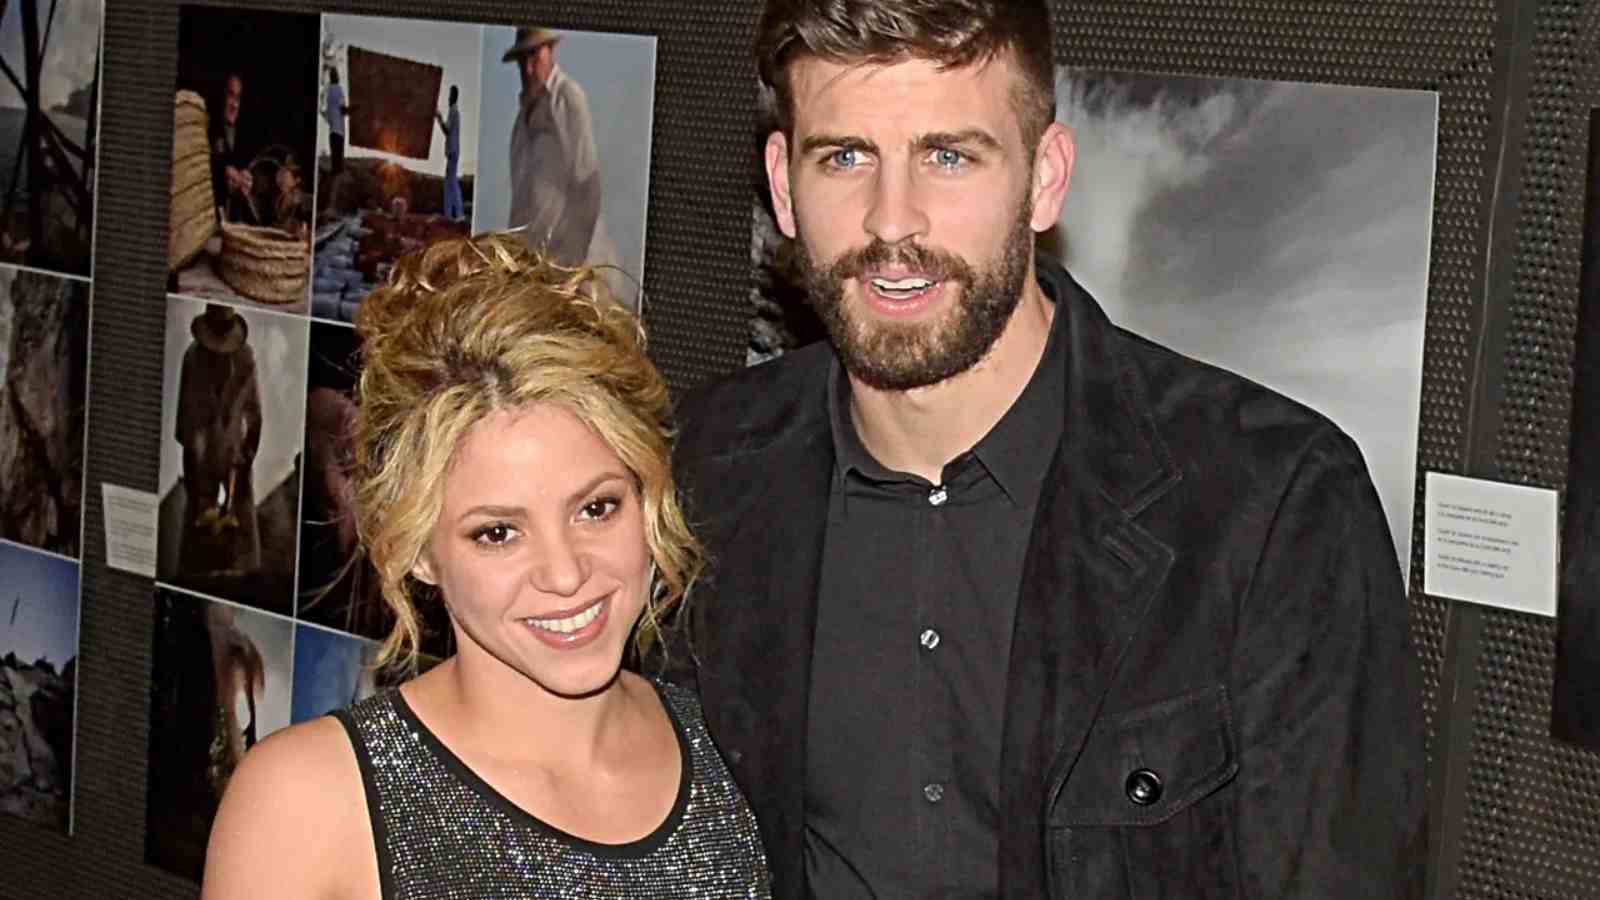 Shakira and her boyfriend Gerard announced they are parting away